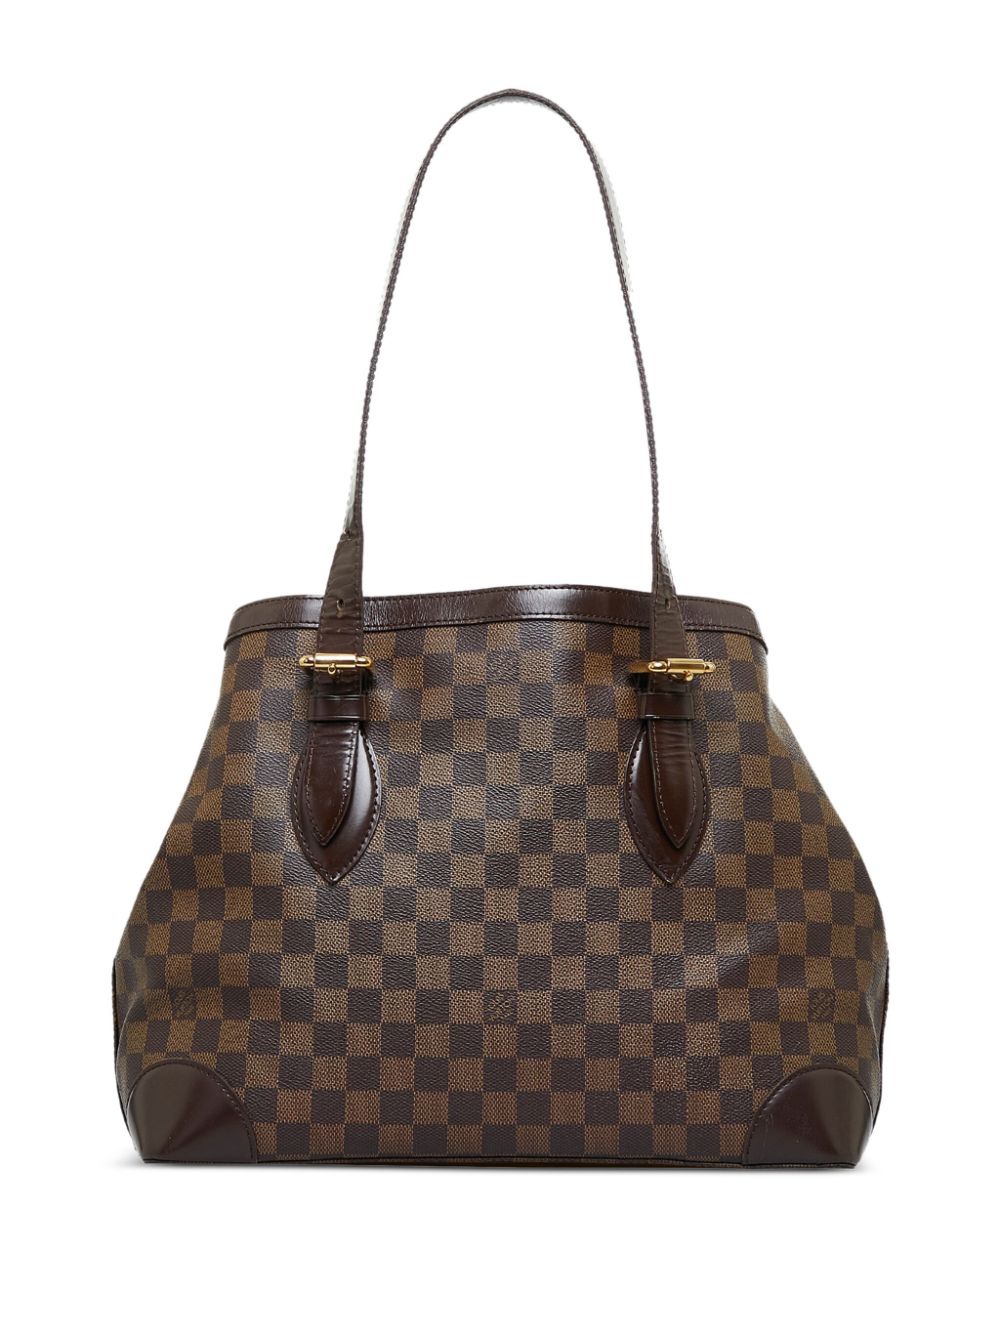 Louis Vuitton 2008 pre-owned Hampstead MM Tote Bag - Farfetch